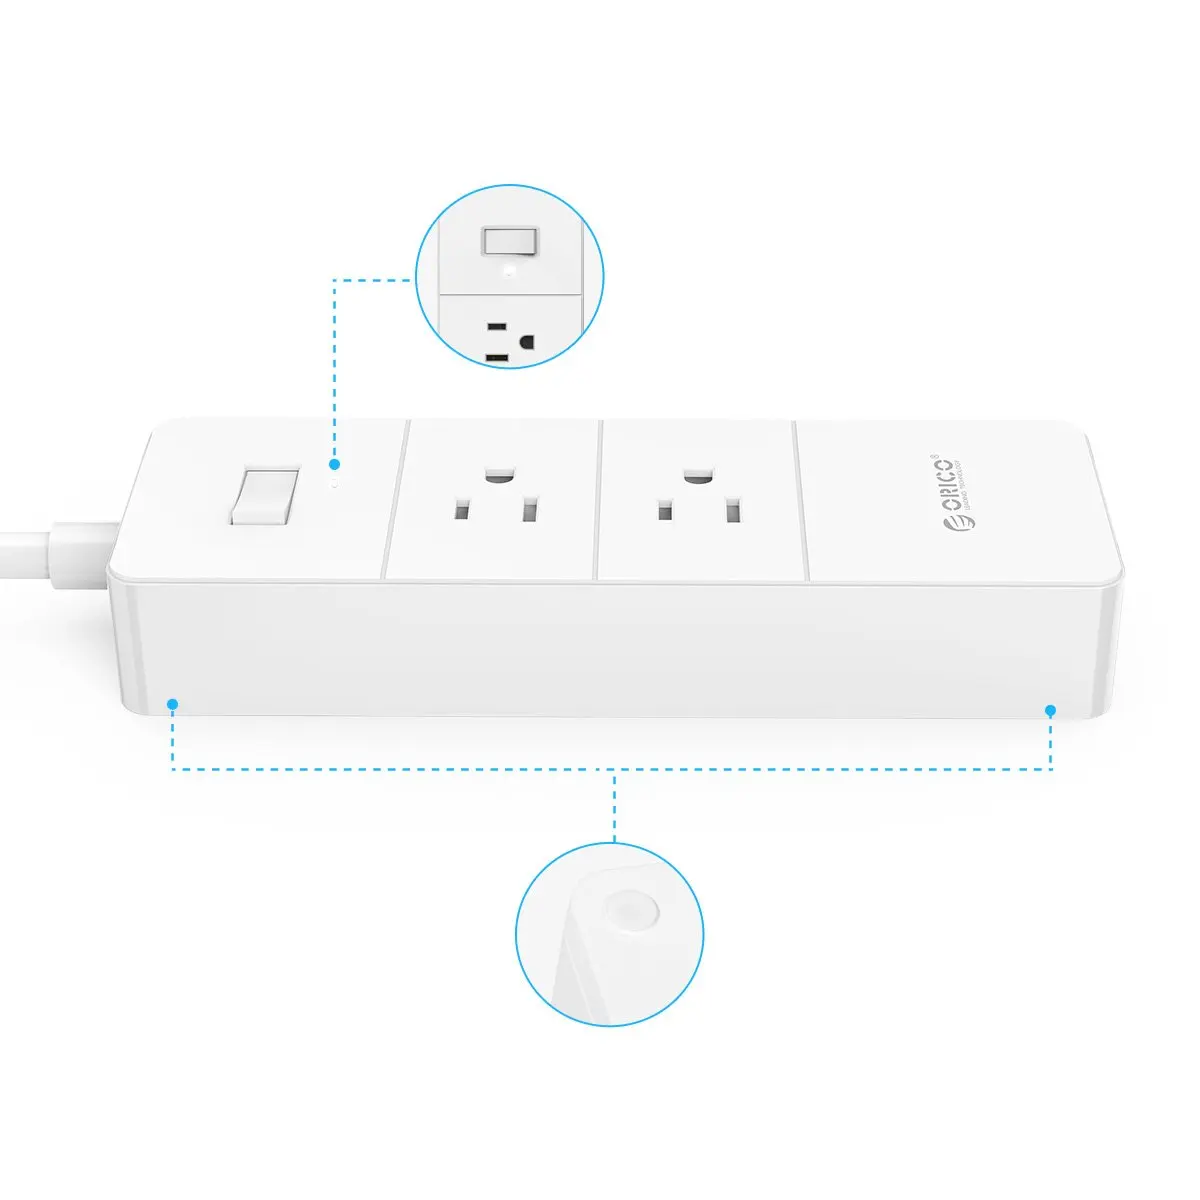 multisocket with 4 Smart USB Ports power strip with 2 Outlet Surge Protection